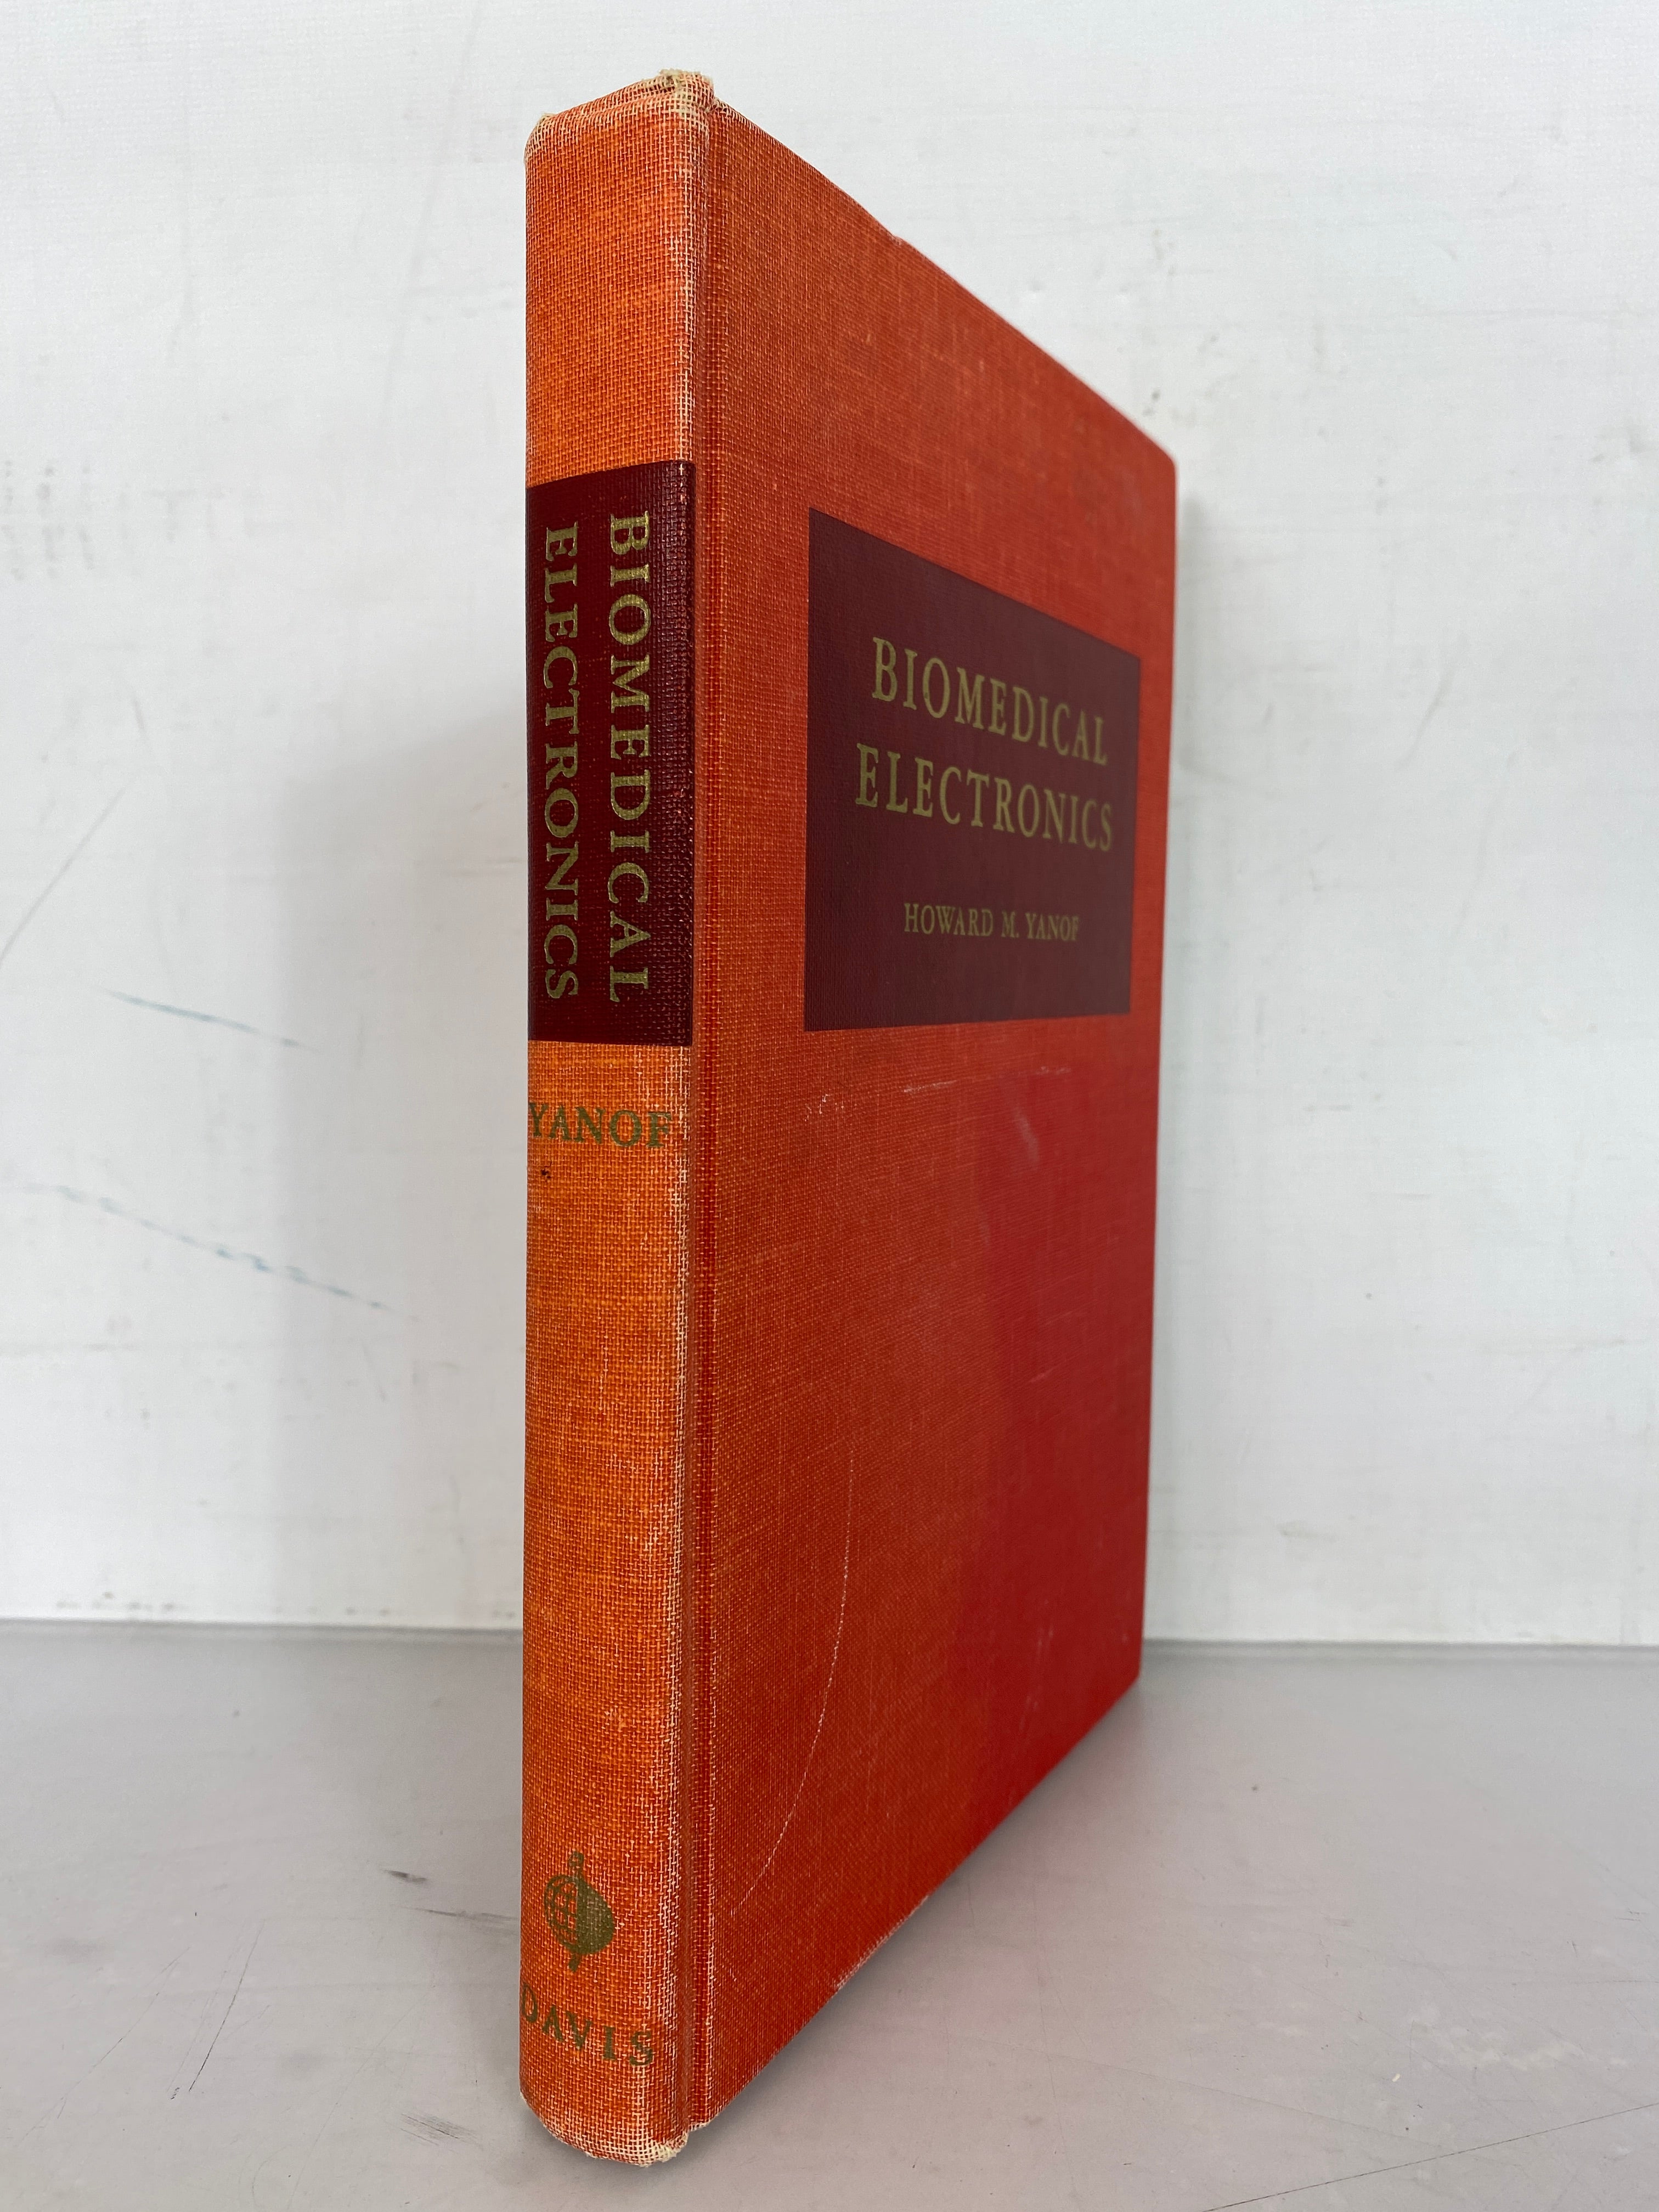 Vintage Biomedical Electronics by Howard Yanof 1965 HC First Edition